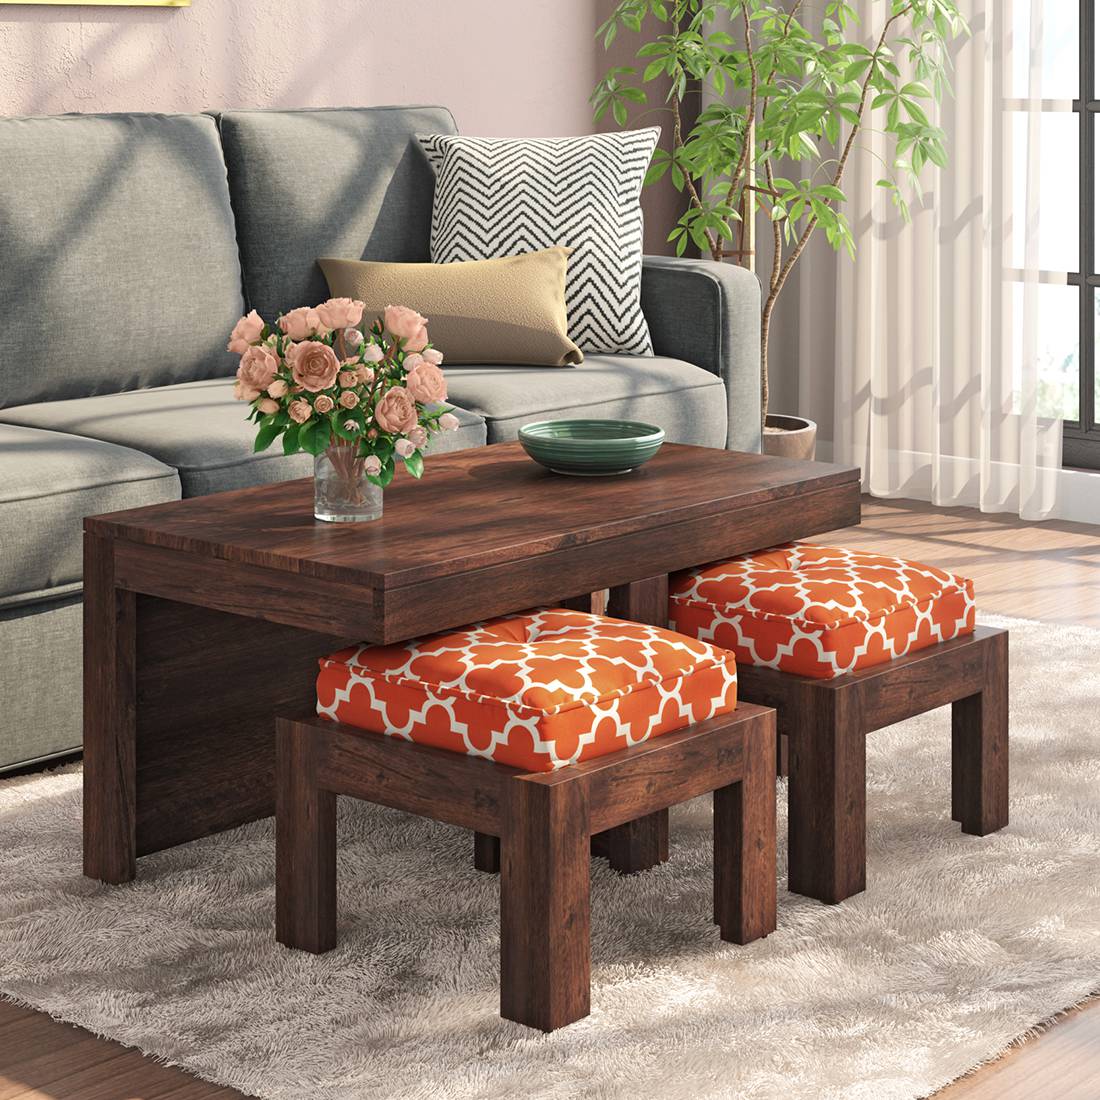 Coffee Table Sets 11 Amazing Coffee Table Set Designs Online Urban Ladder